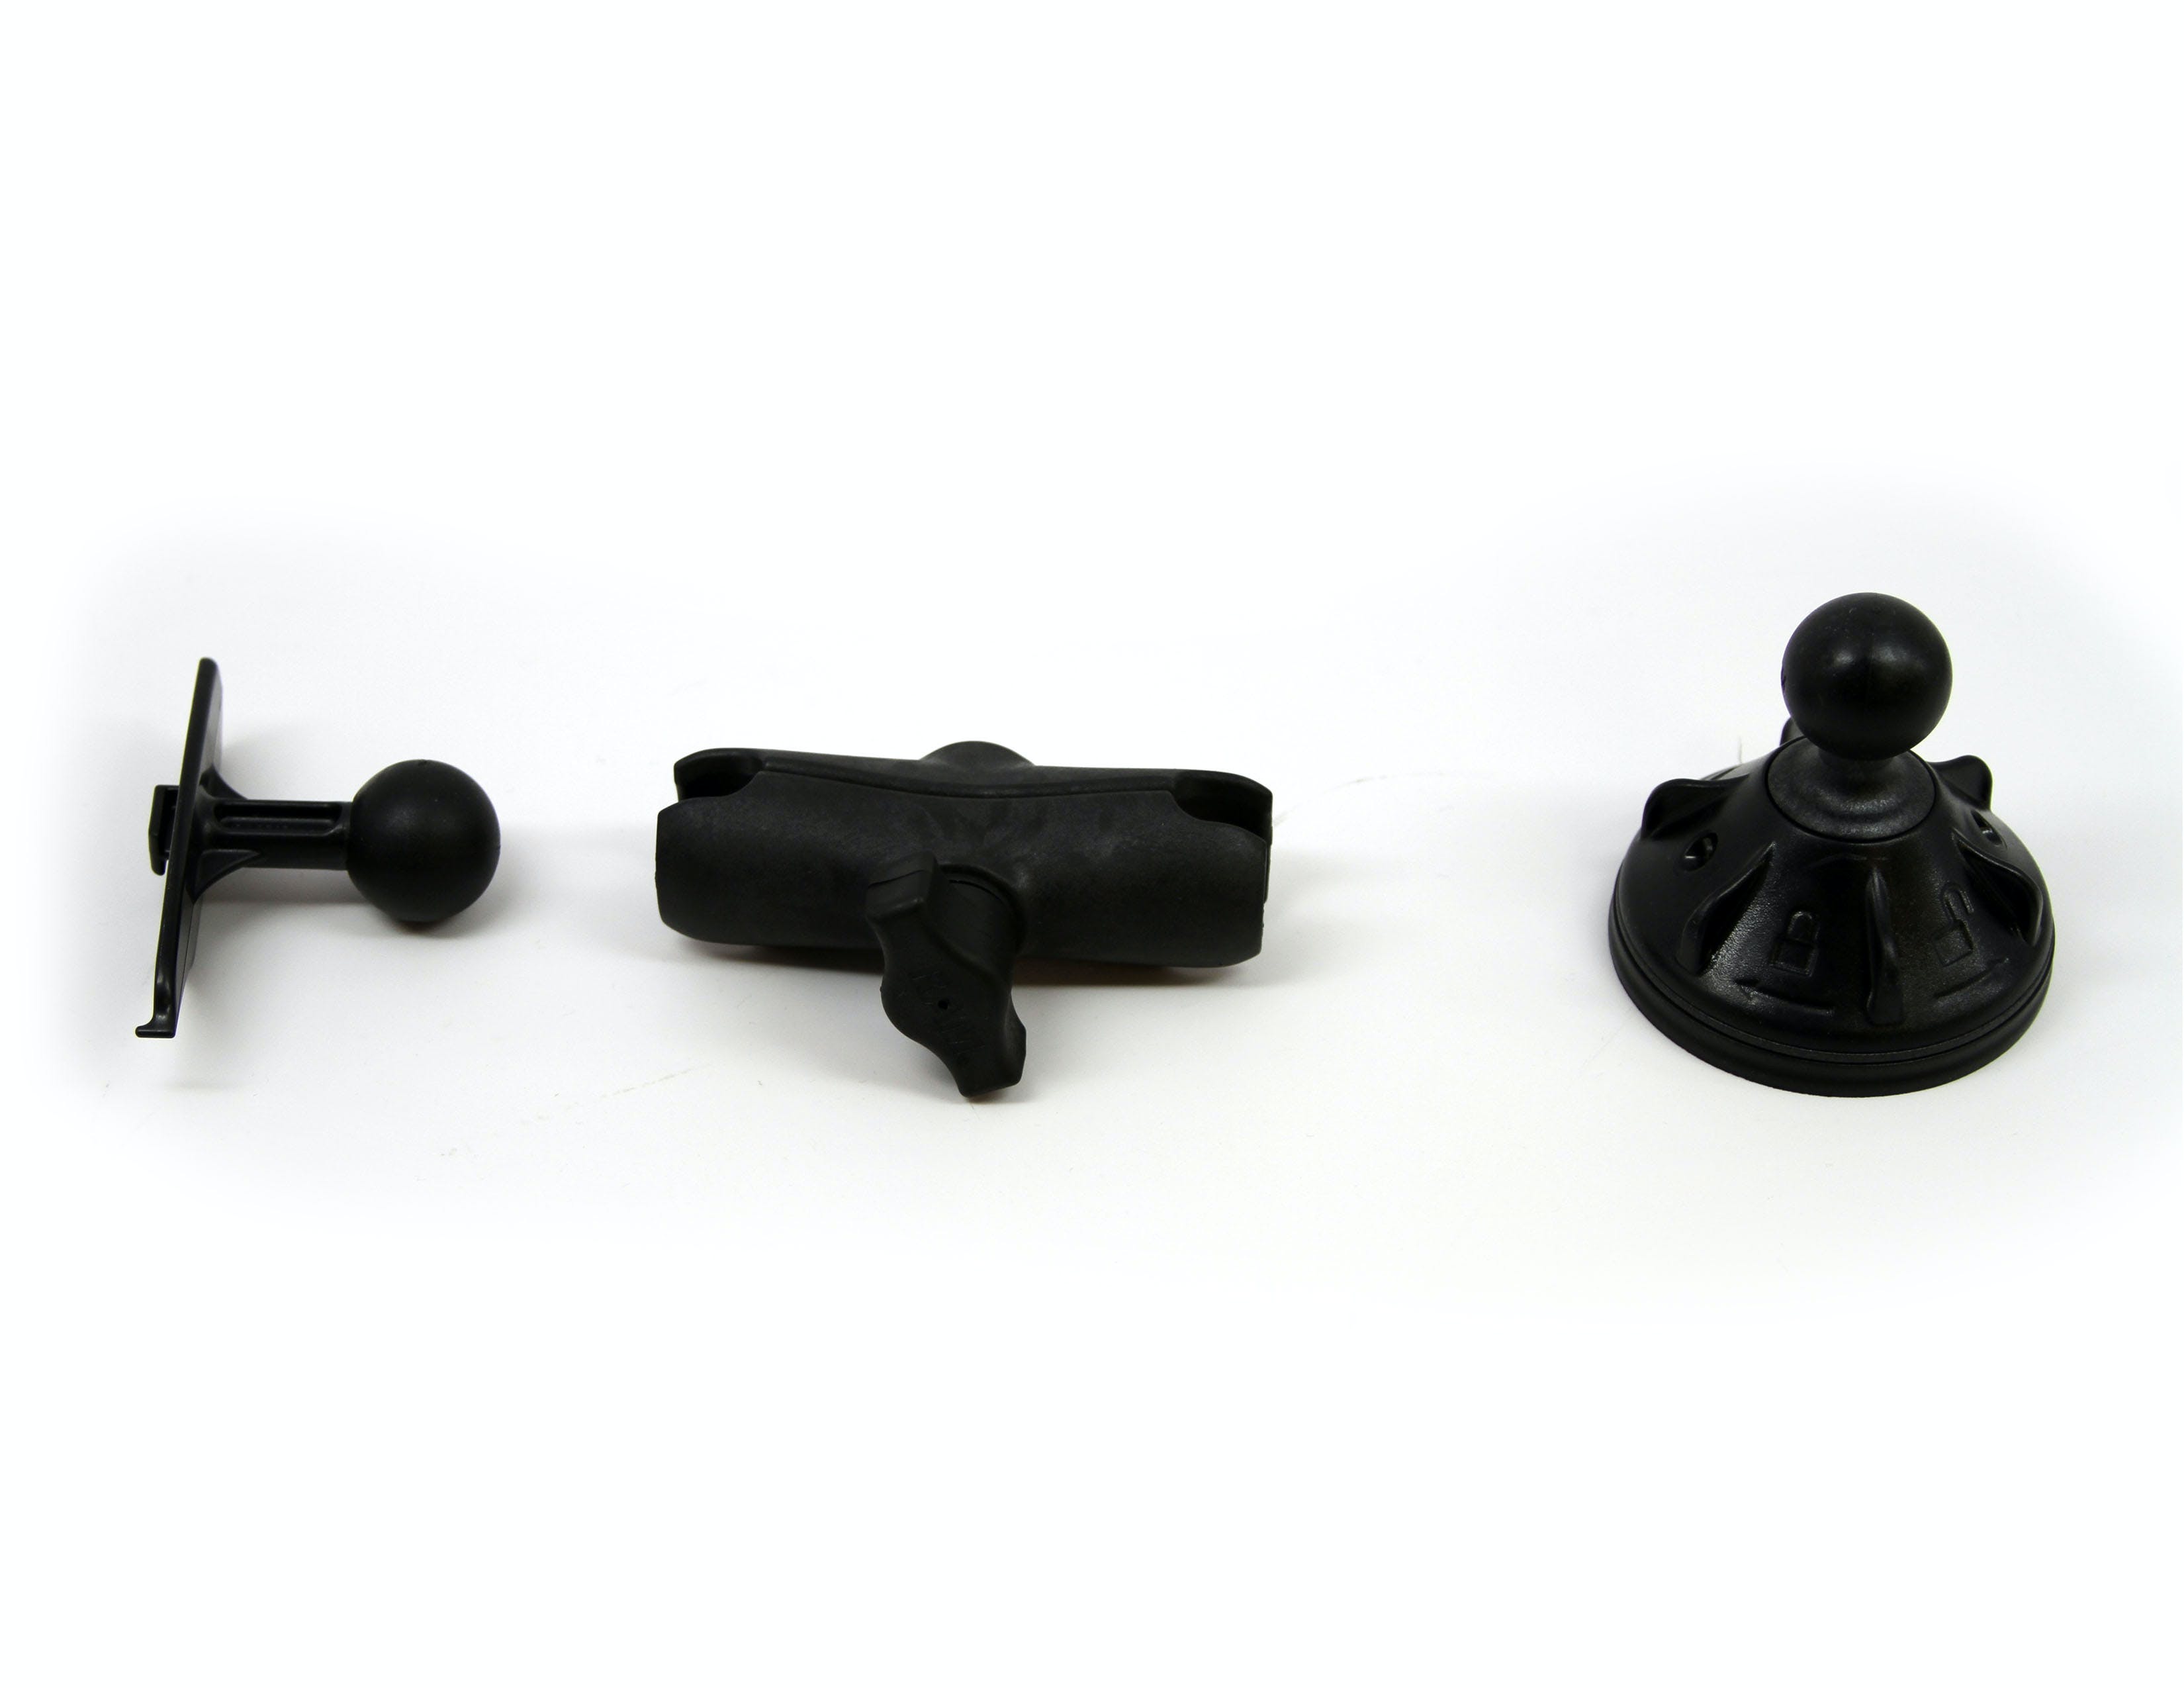 Bully Dog 30600 RAM Heavy Duty Suction Cup Mounting kit for GT